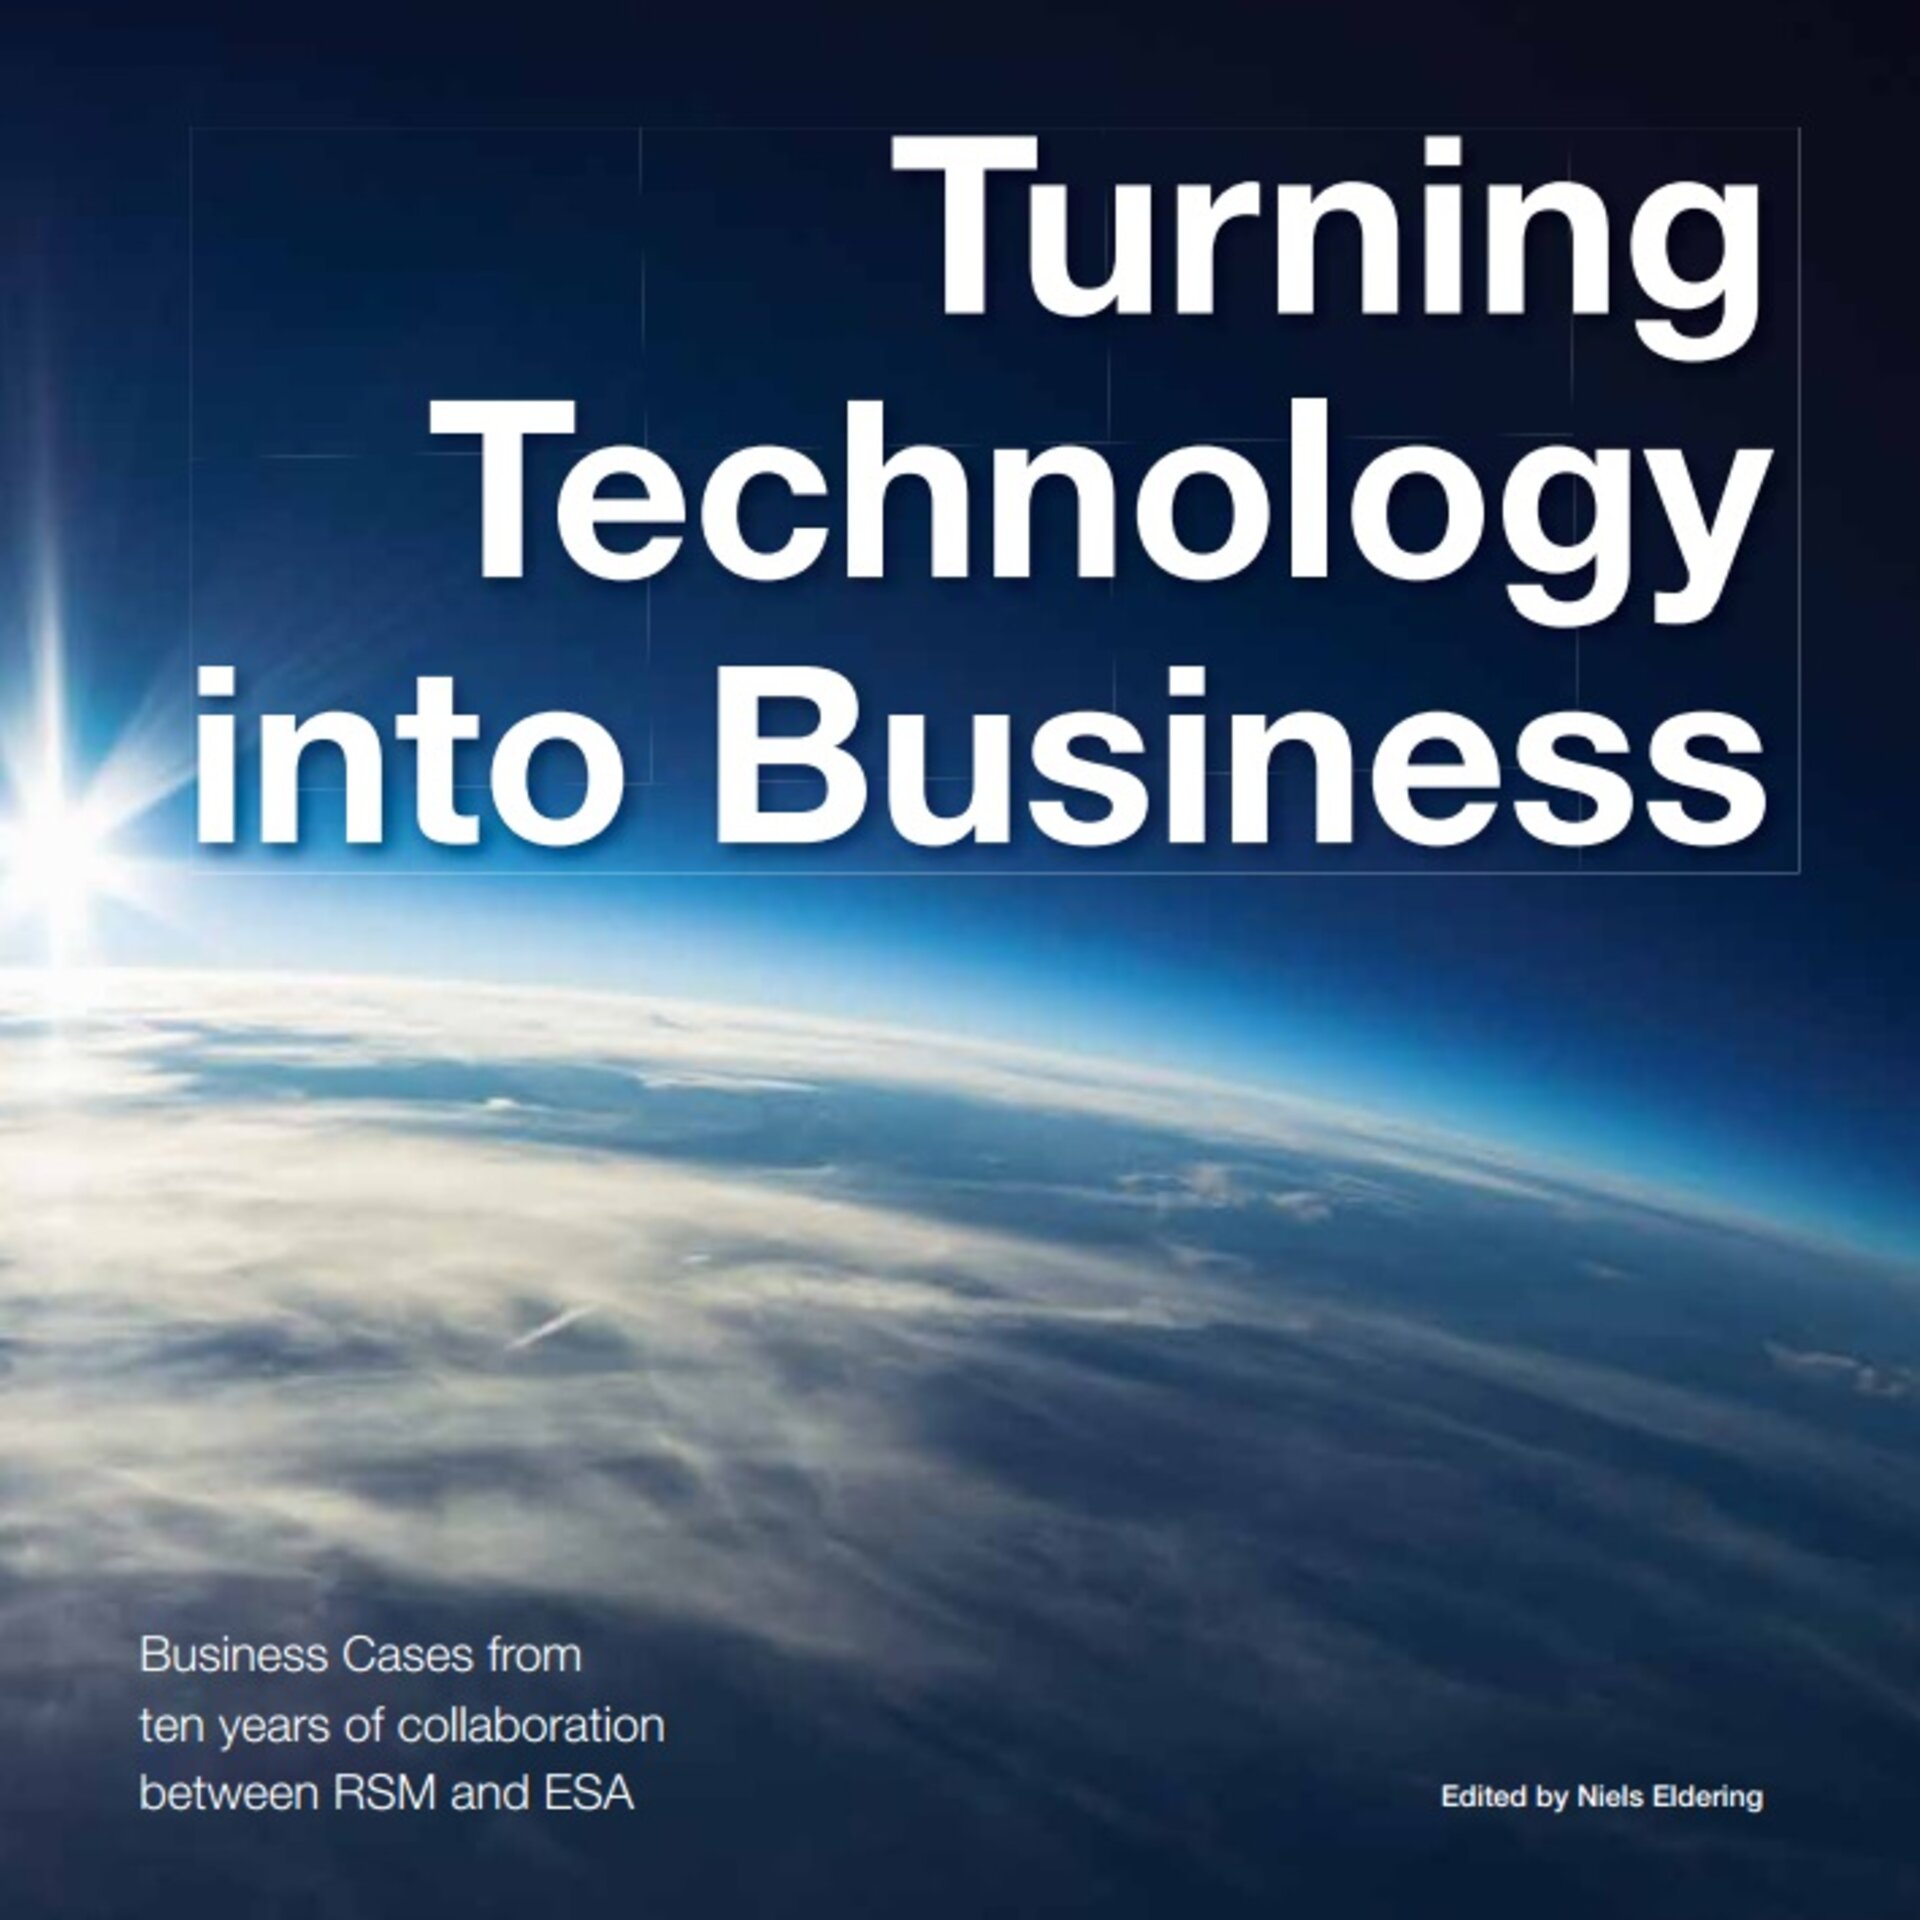 Turning Technology into Business brochure